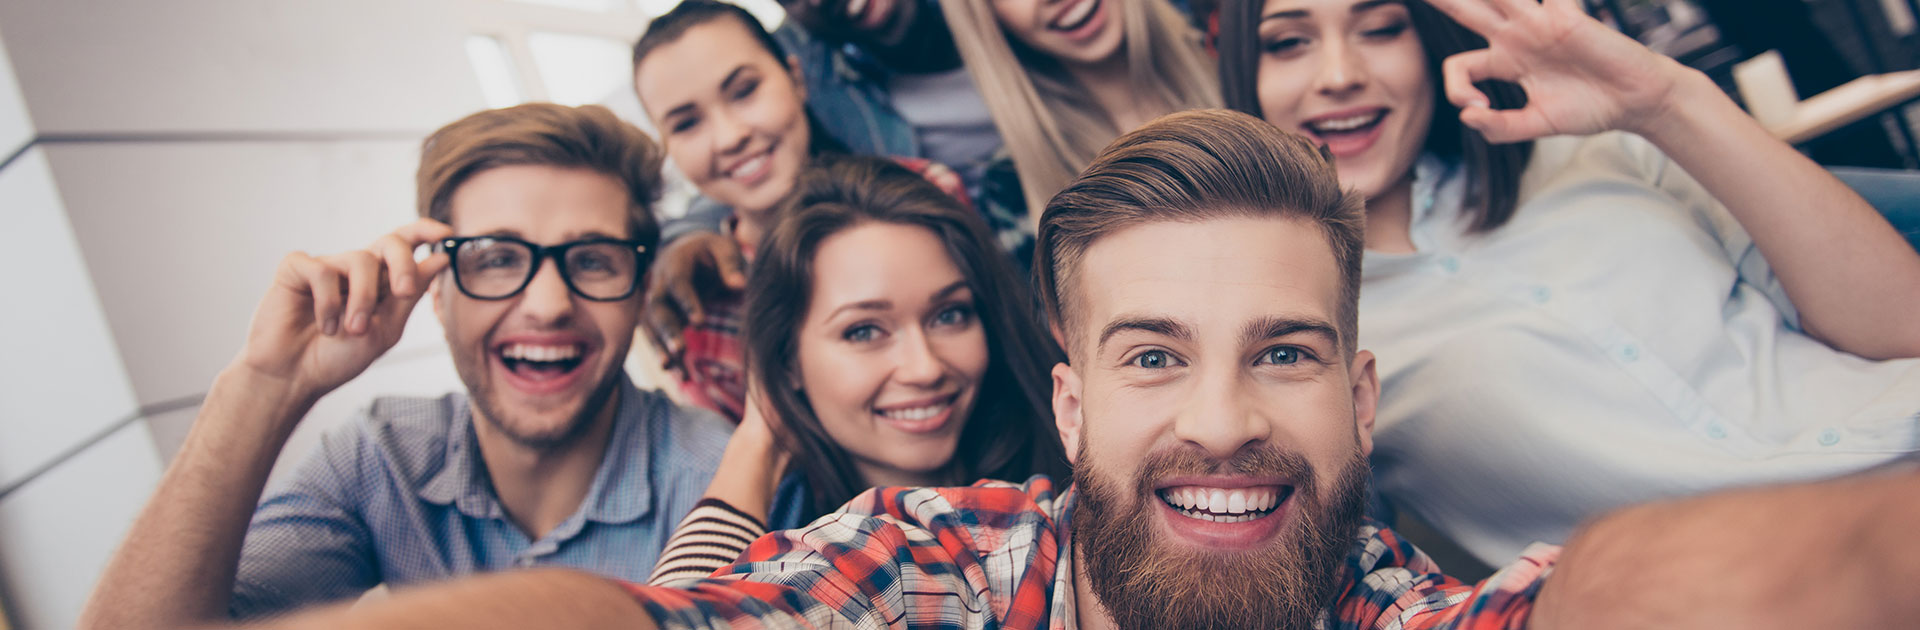 A group of young people smiling and posing for a selfie with a young bearded man in a multi-colored plaid shirt in the forefront holding up a camera phone.